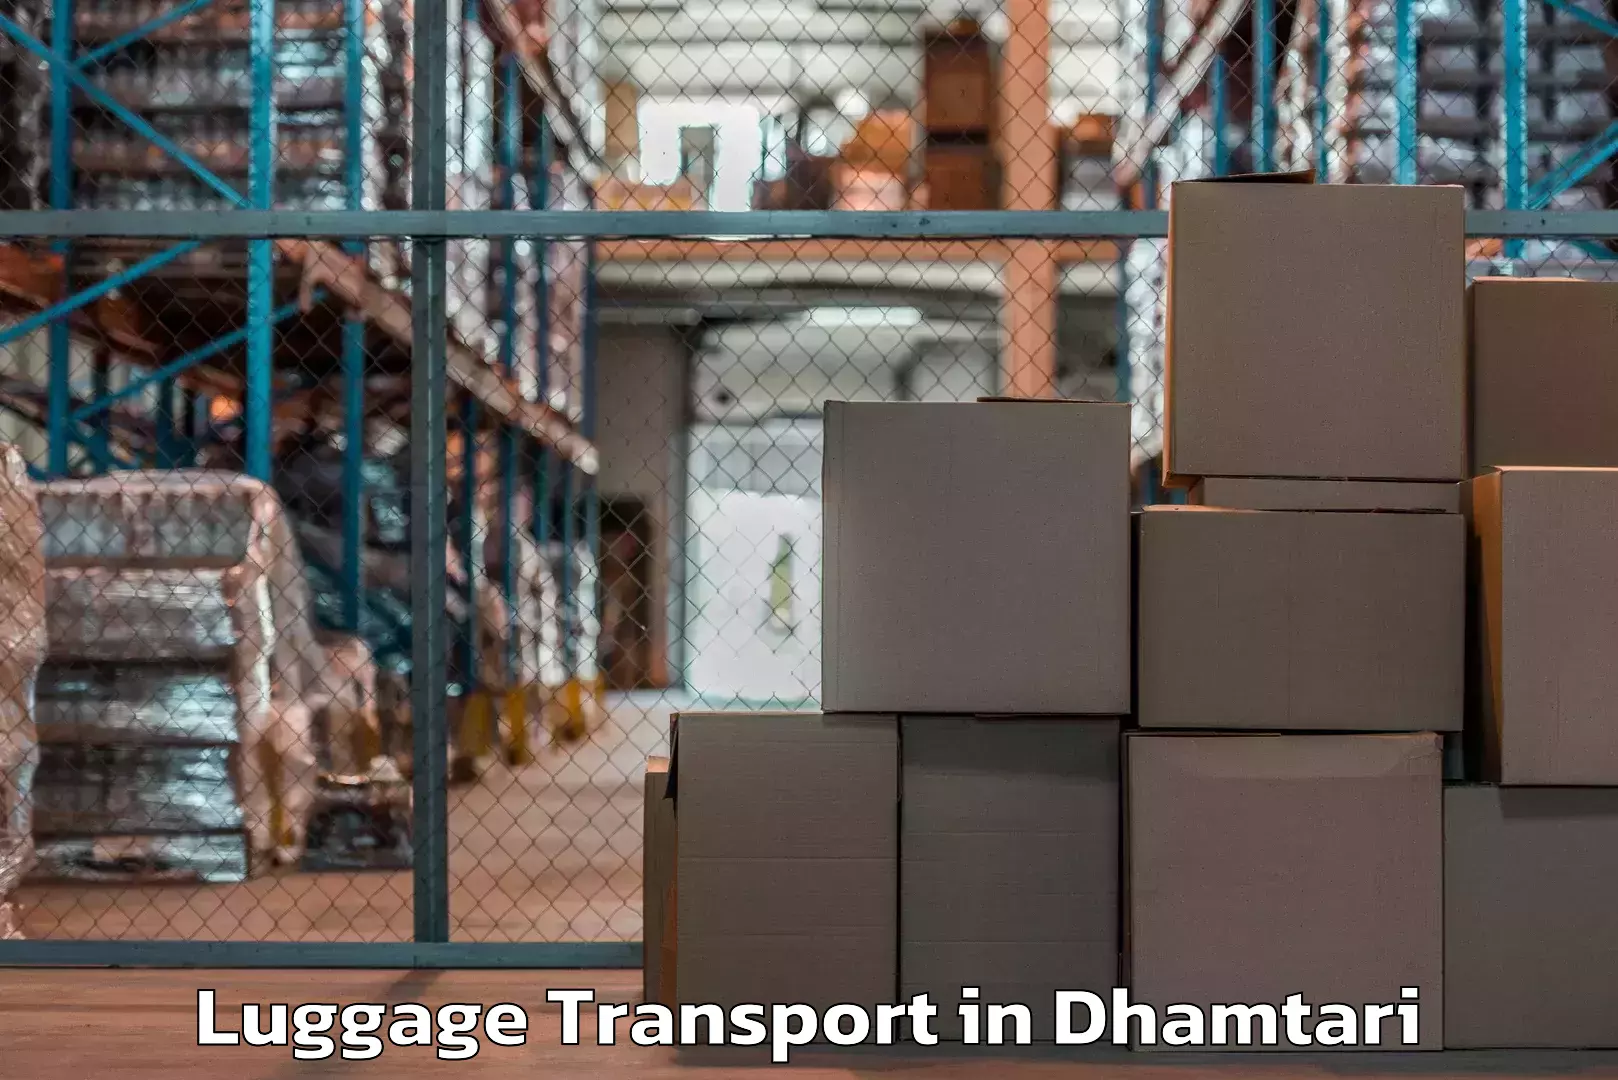 Luggage shipment specialists in Dhamtari